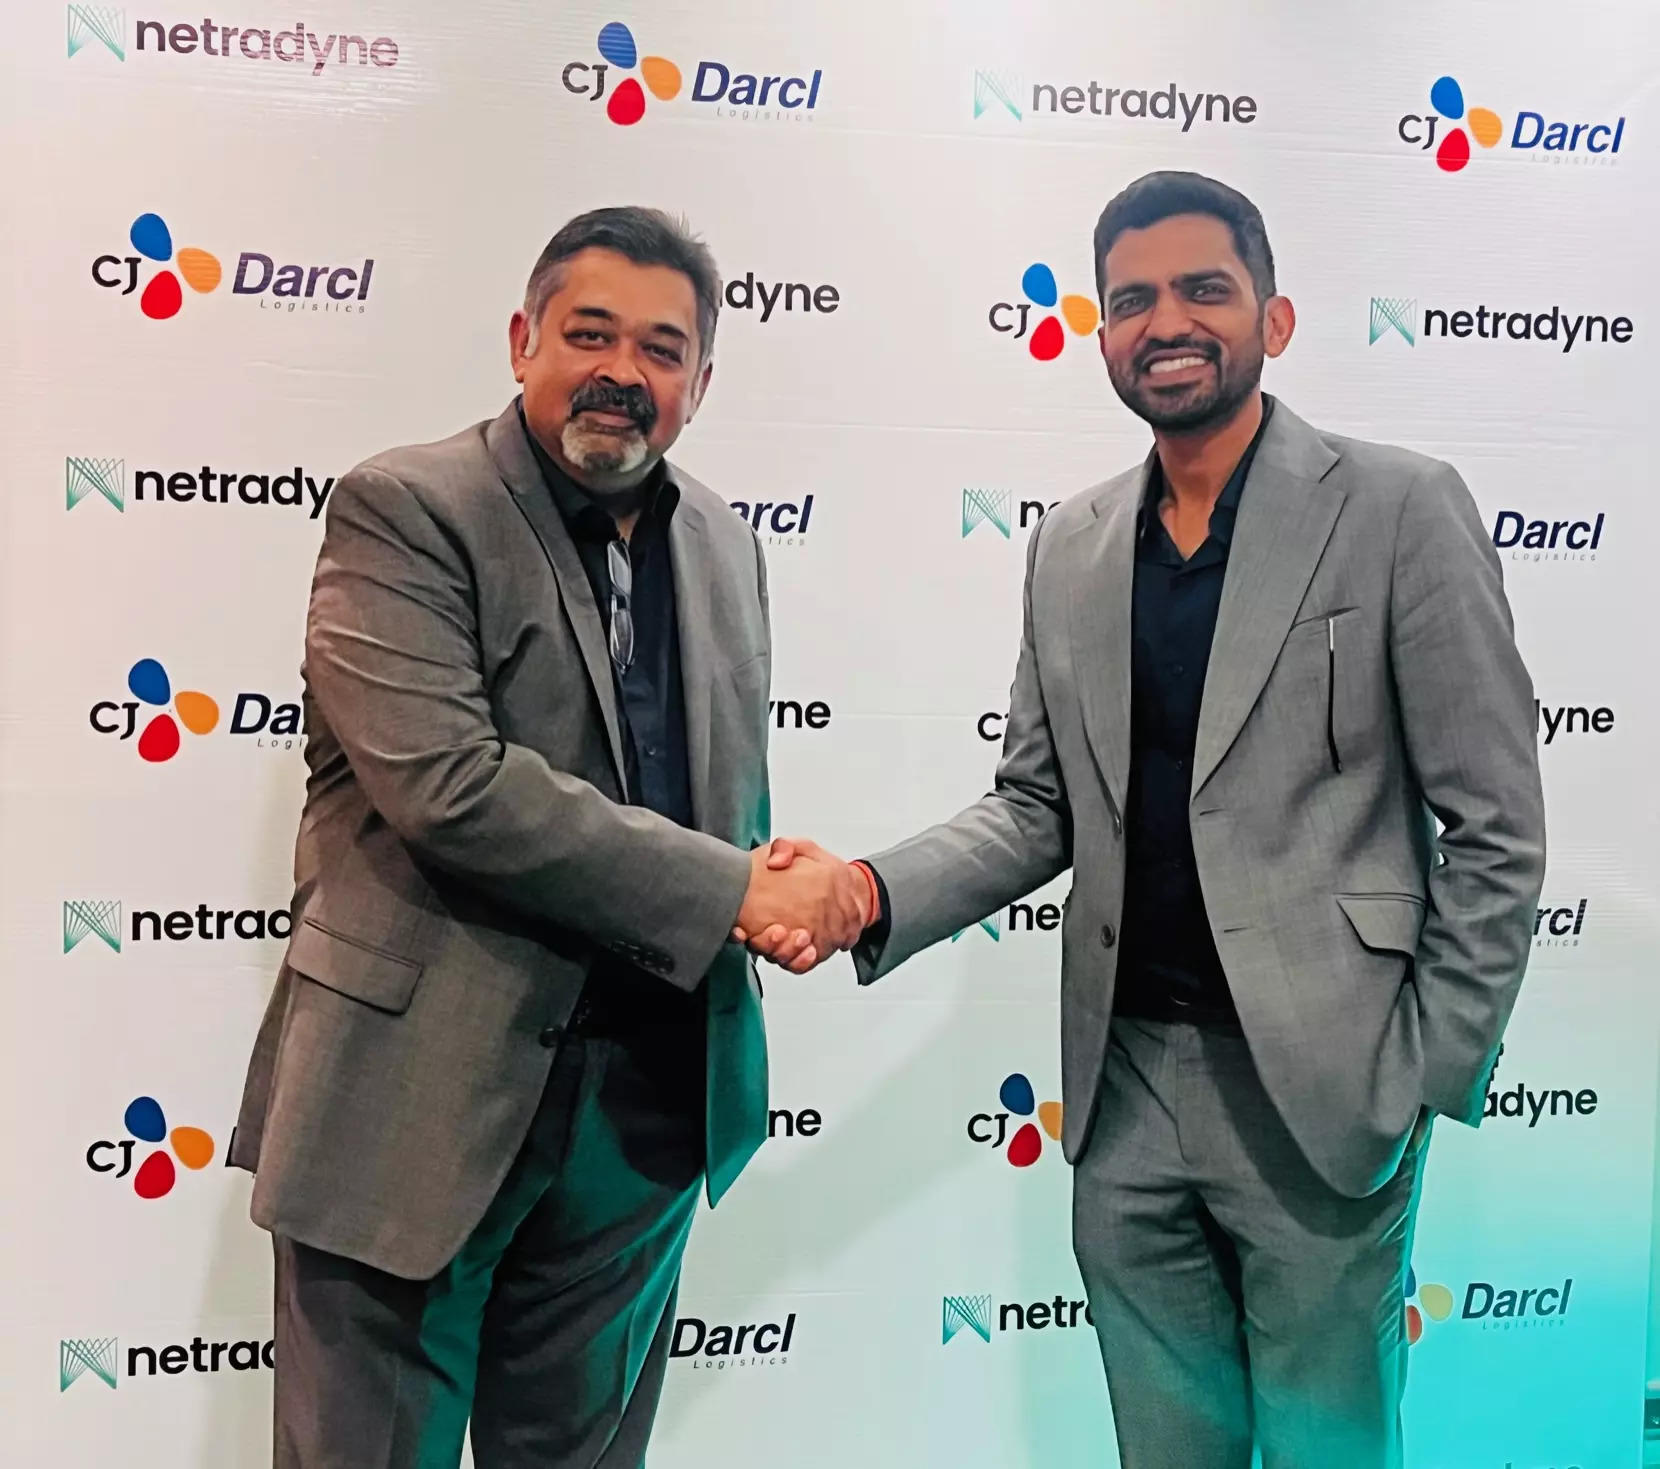  CJ Darcl Logistics Ltd., a leading logistics provider in India, has selected Netradyne to provide advanced fleet safety solutions.